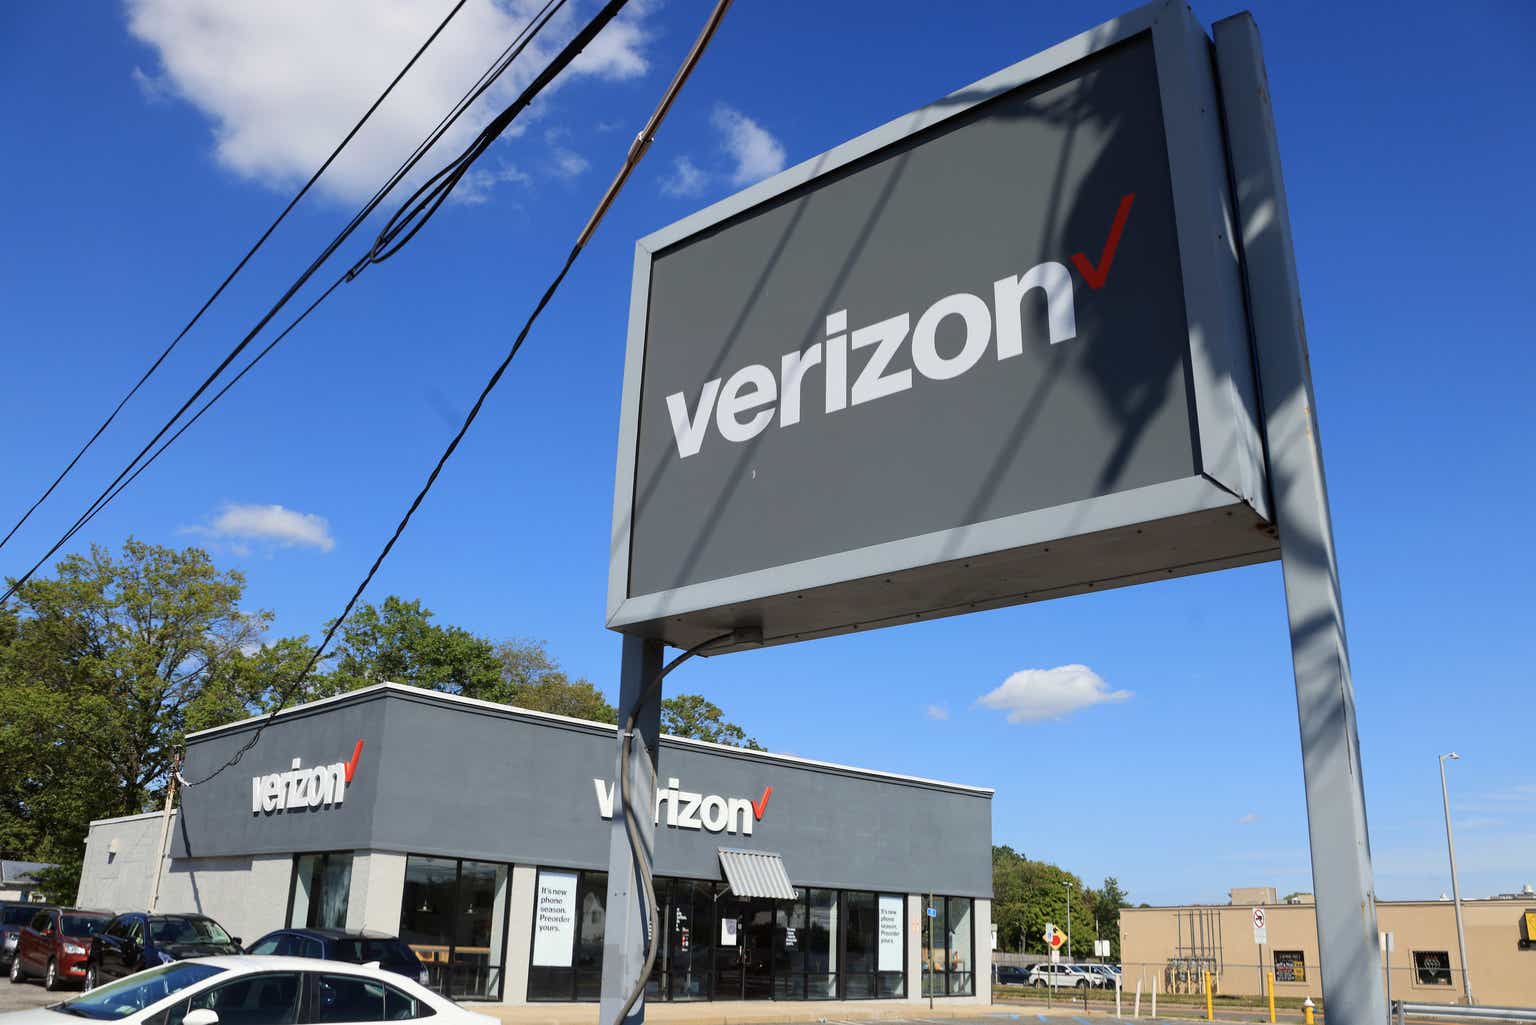 Verizon Communications in 2023 - A Look Ahead 9. Verizon's Struggle to Find Momentum for Sustained Recovery